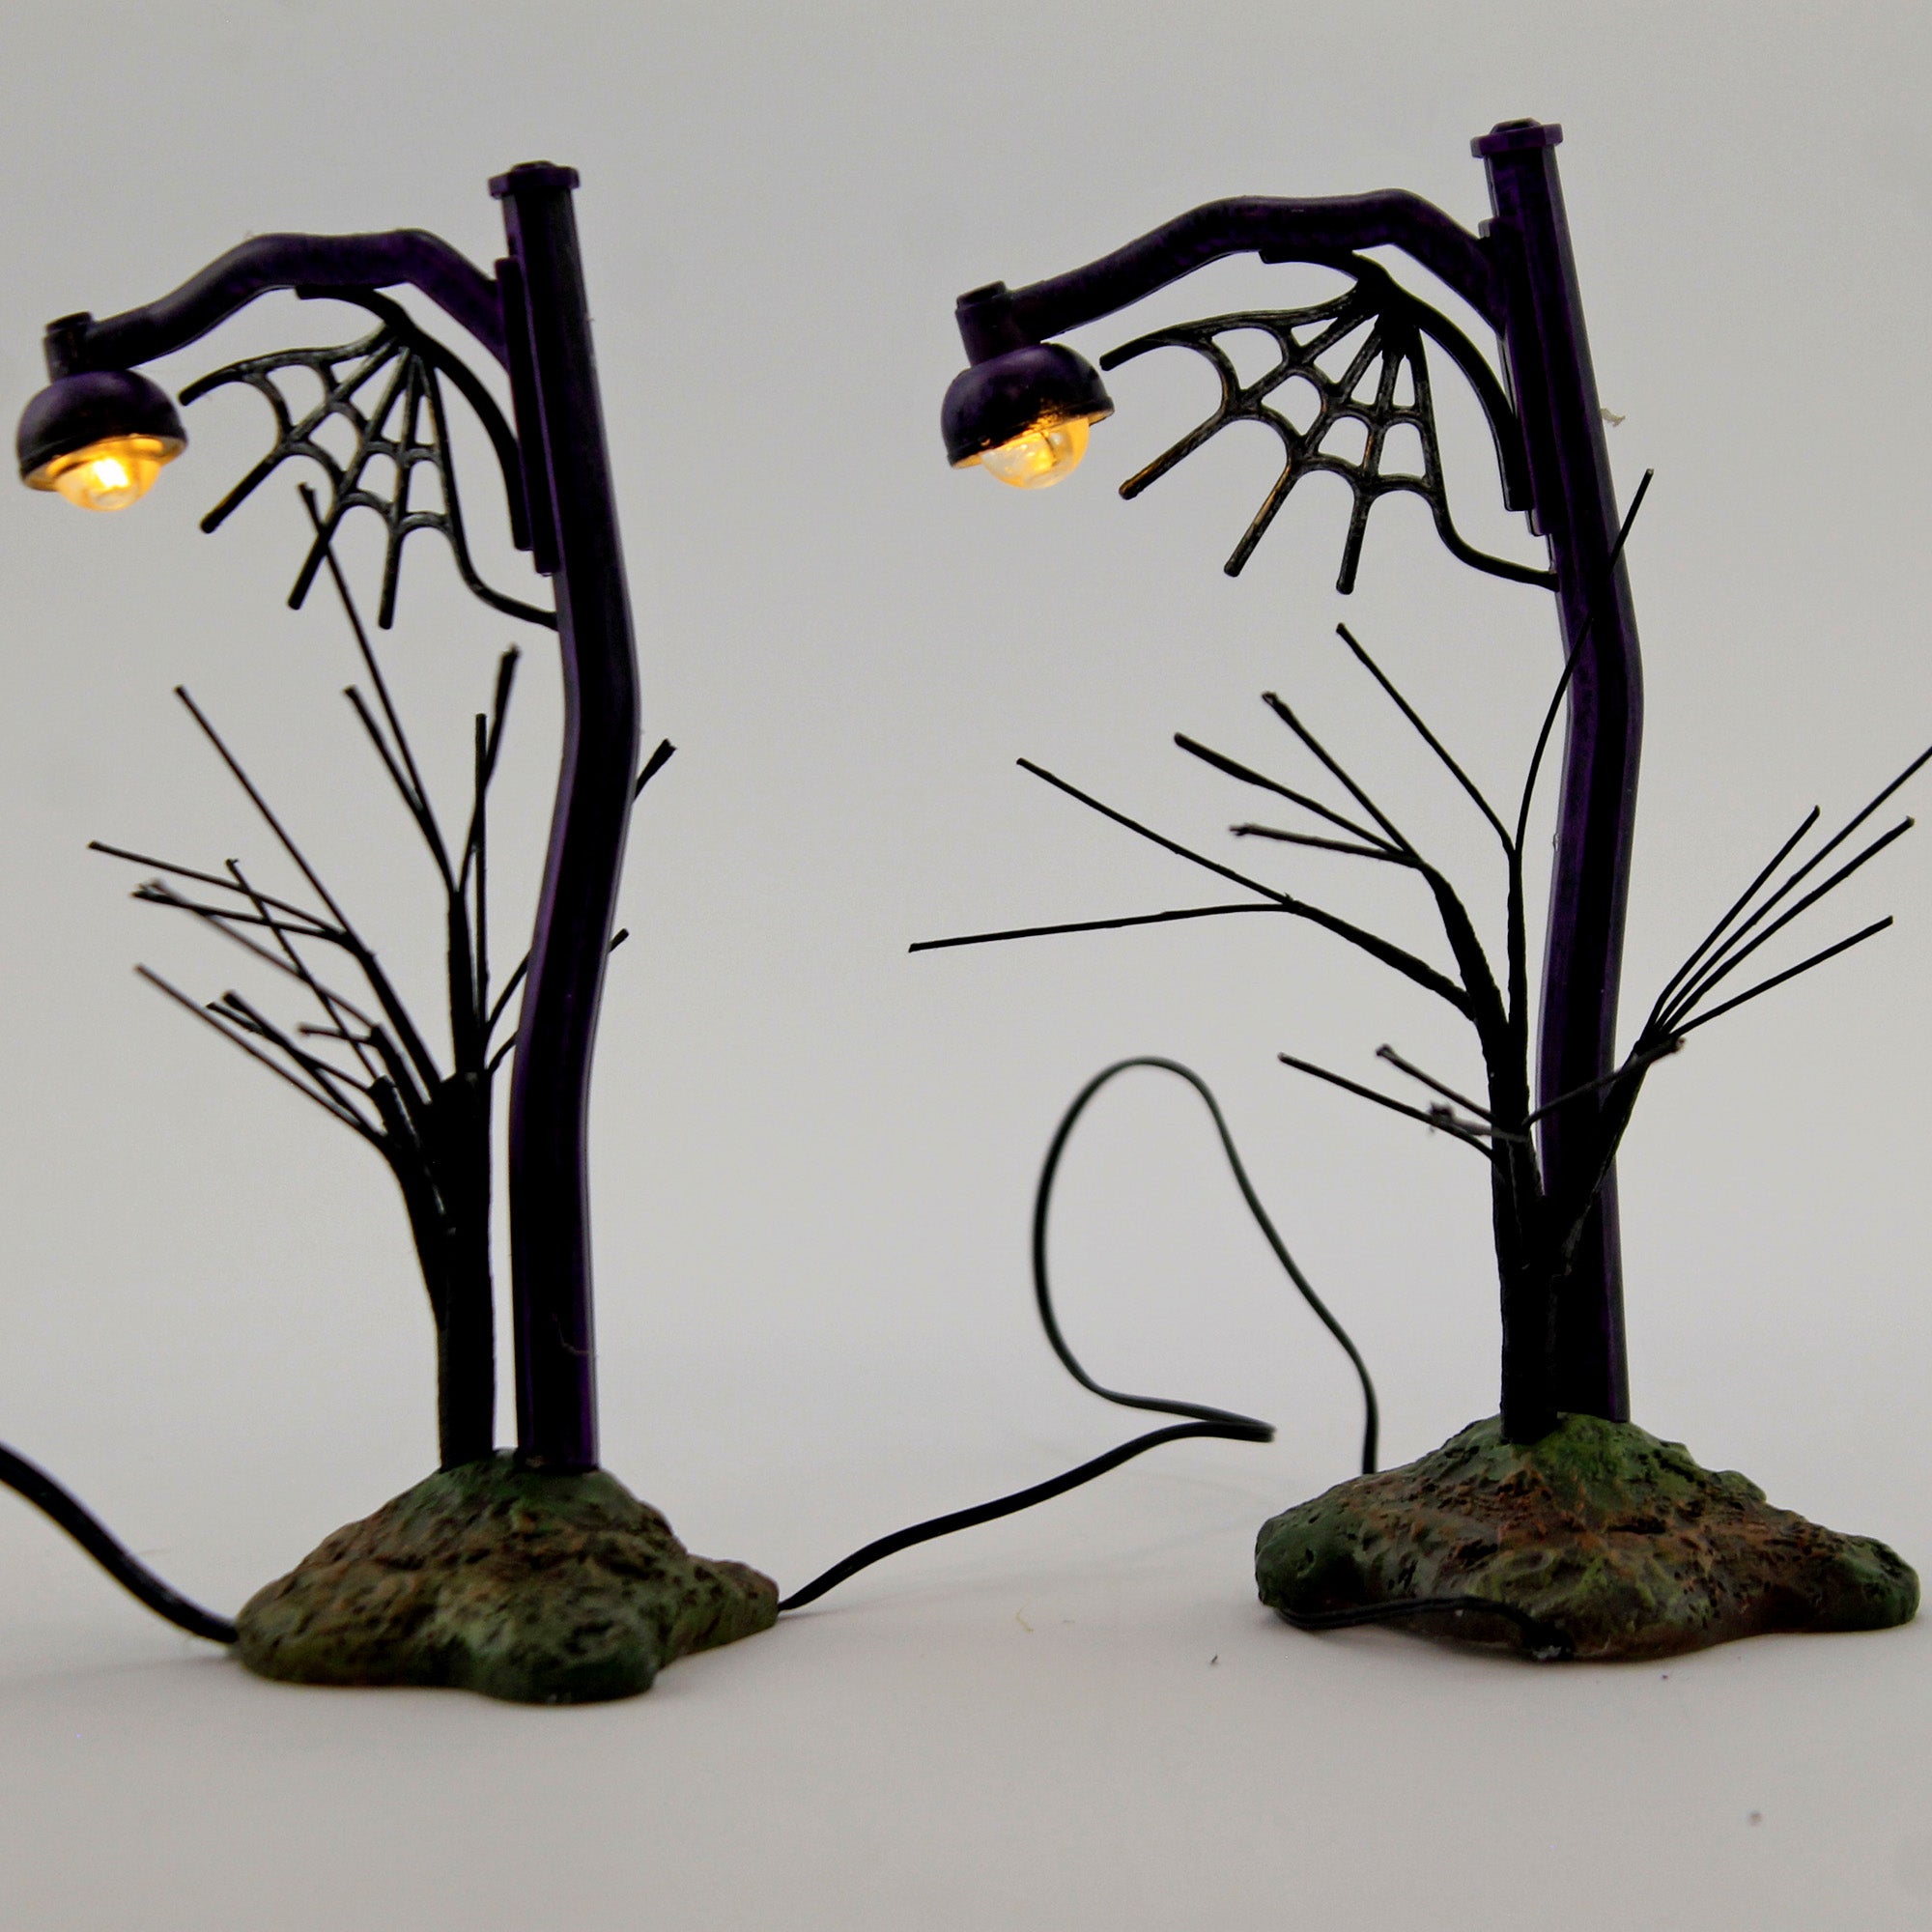 Department 56 Accessory Creepy Country Street Lights Halloween 6007713  (50856)